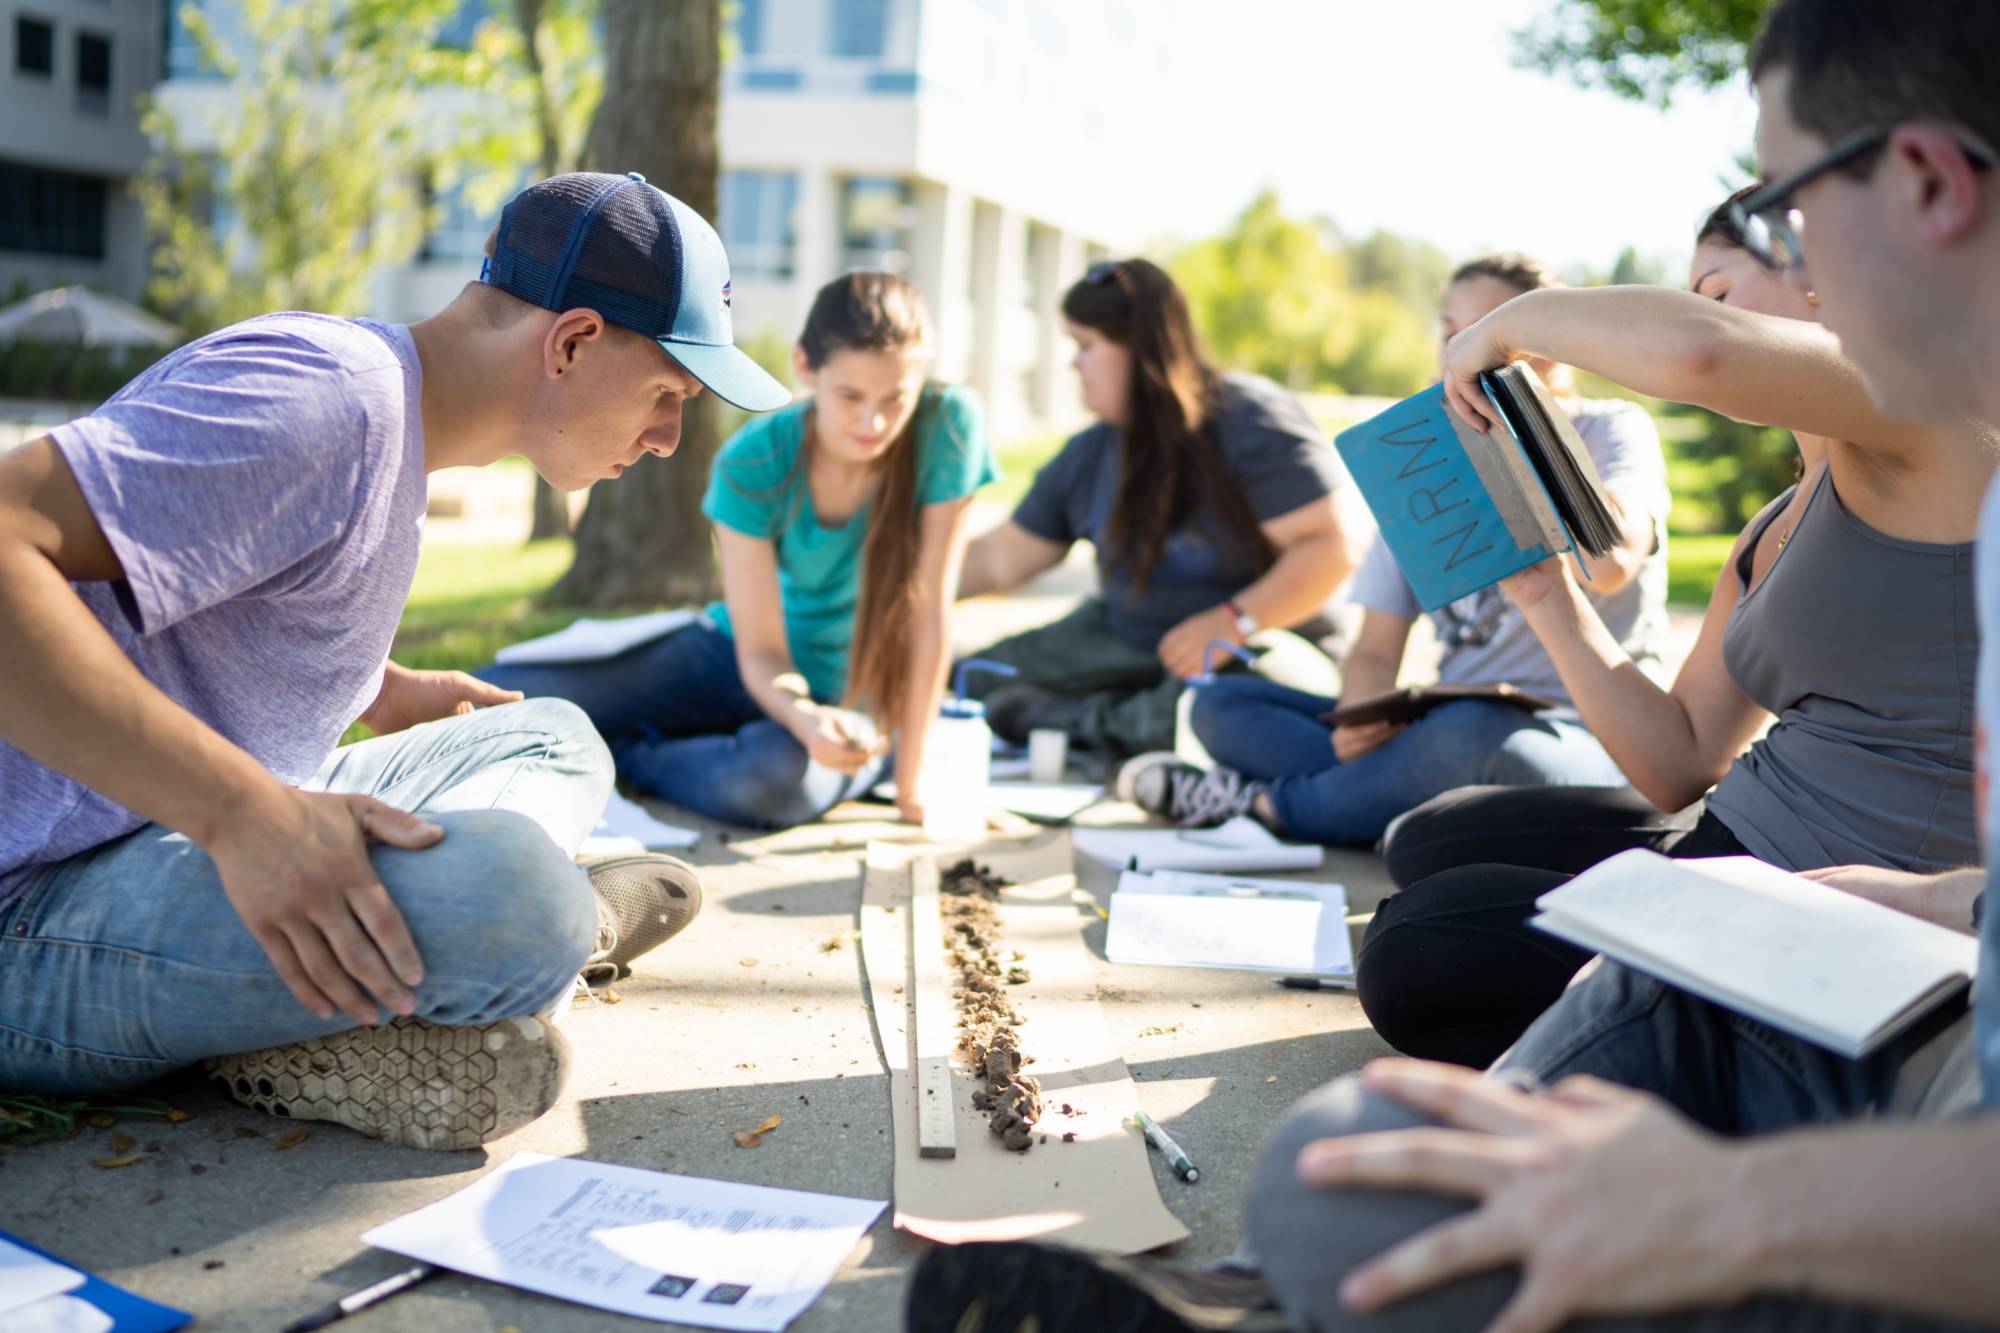 Students sitting on the ground outside gathered around a soil sample and analyzing it